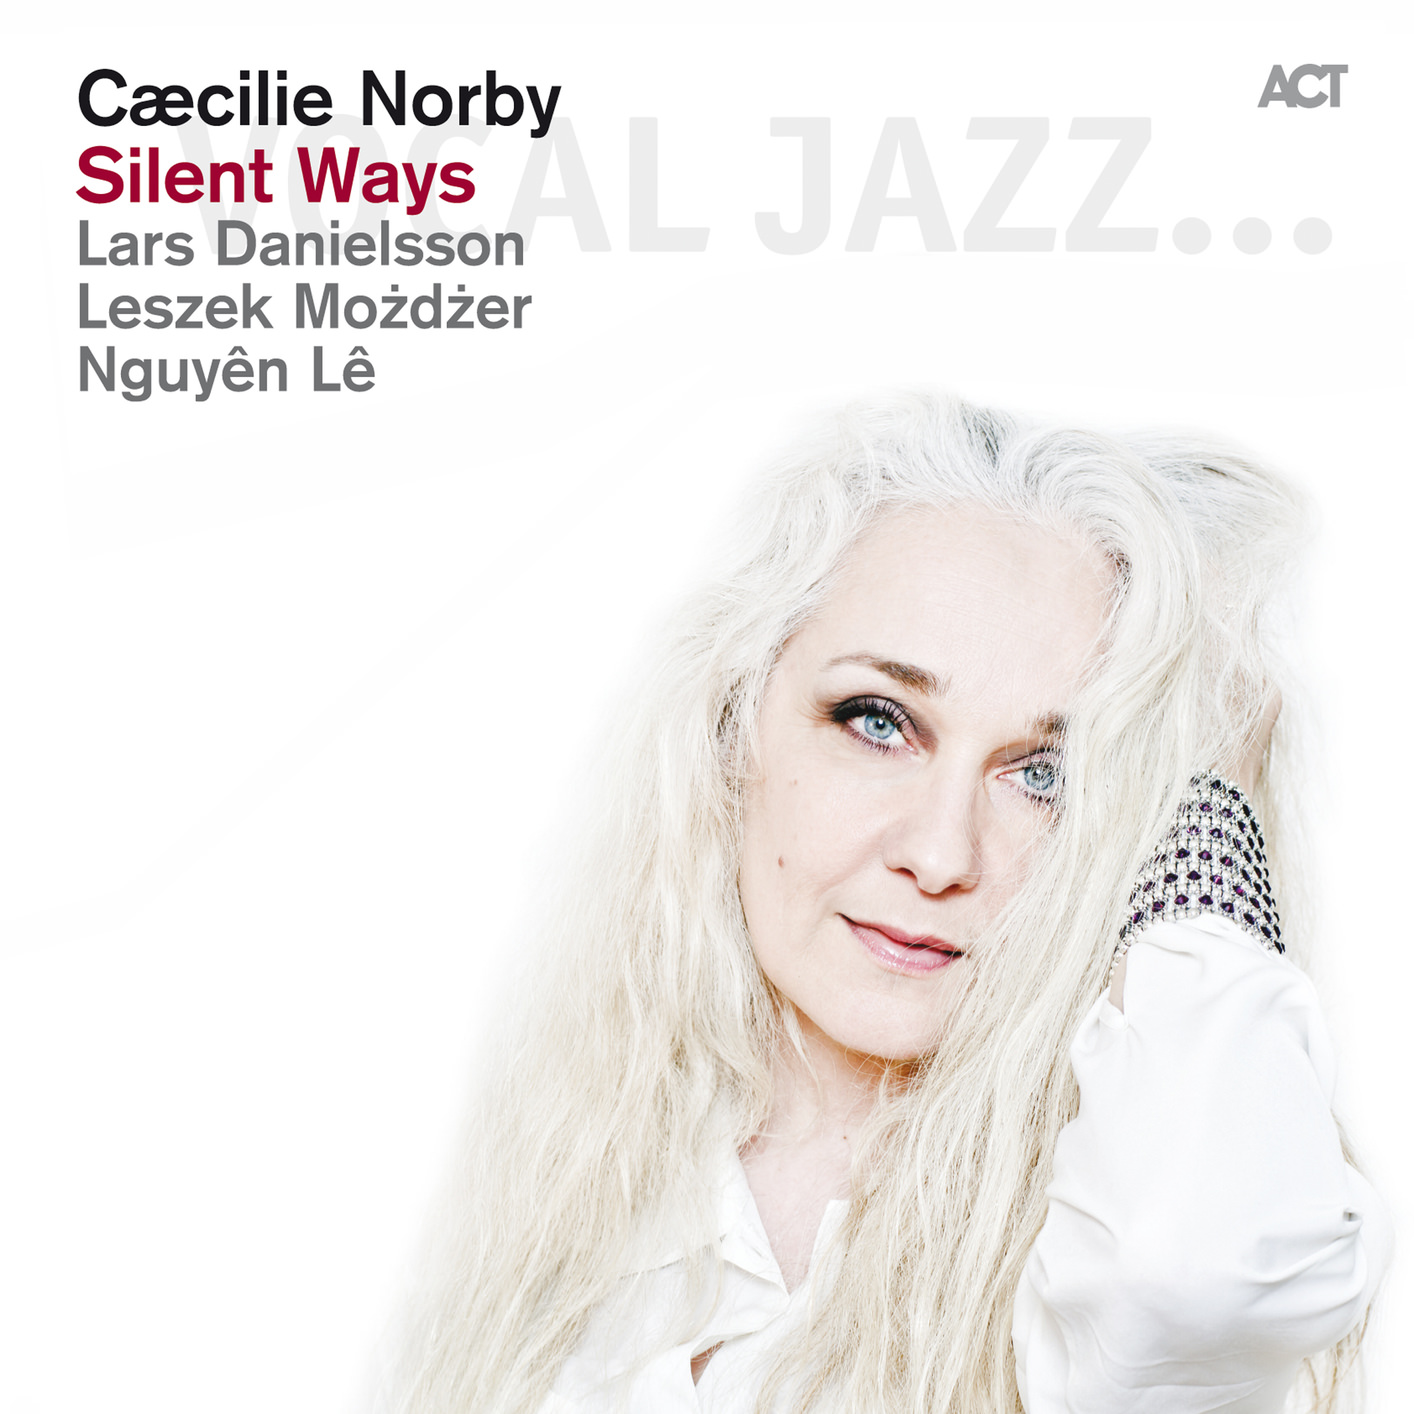 Caecilie Norby – Silent Ways (2013/2014) [ProStudioMasters FLAC 24bit/96kHz]